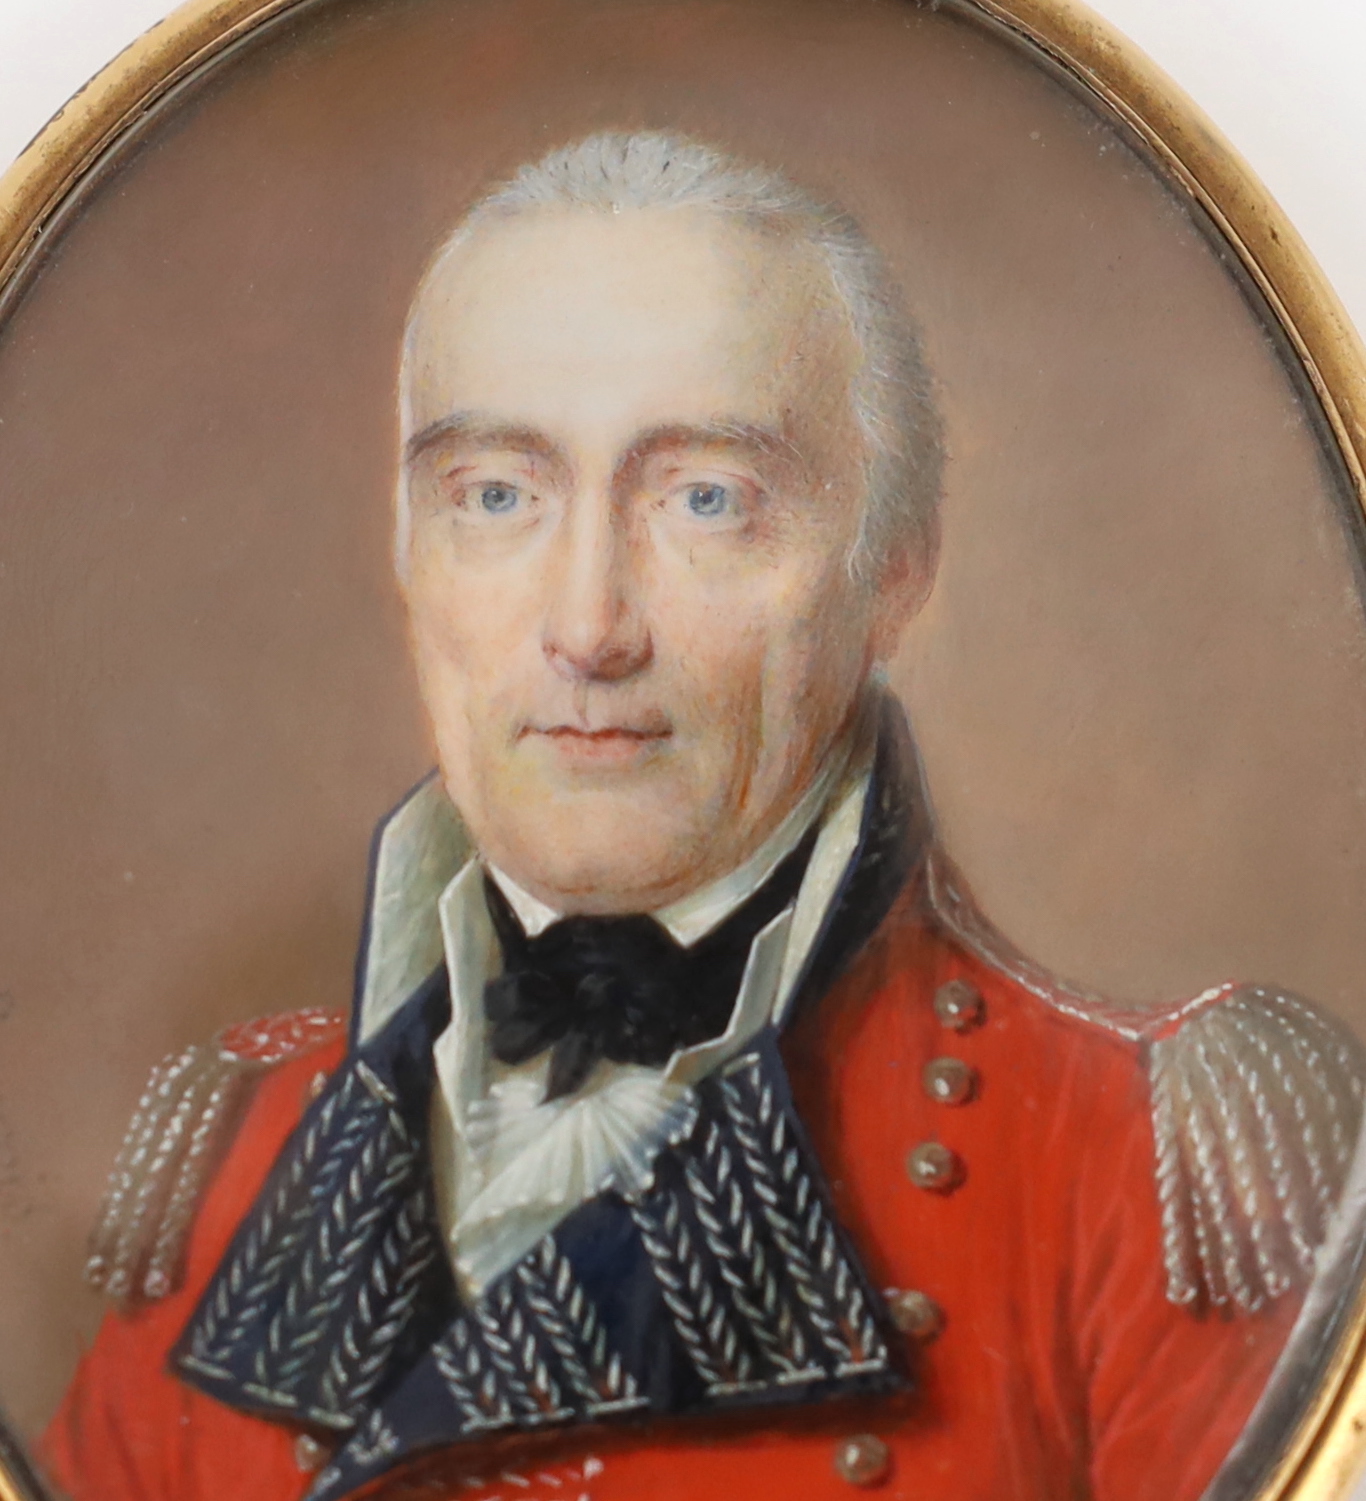 J. Barrow Jnr (fl.1815-1825), Portrait miniature of an army officer, watercolour on ivory, 7.3 x 5.8cm. CITES Submission reference TUP8PBTX